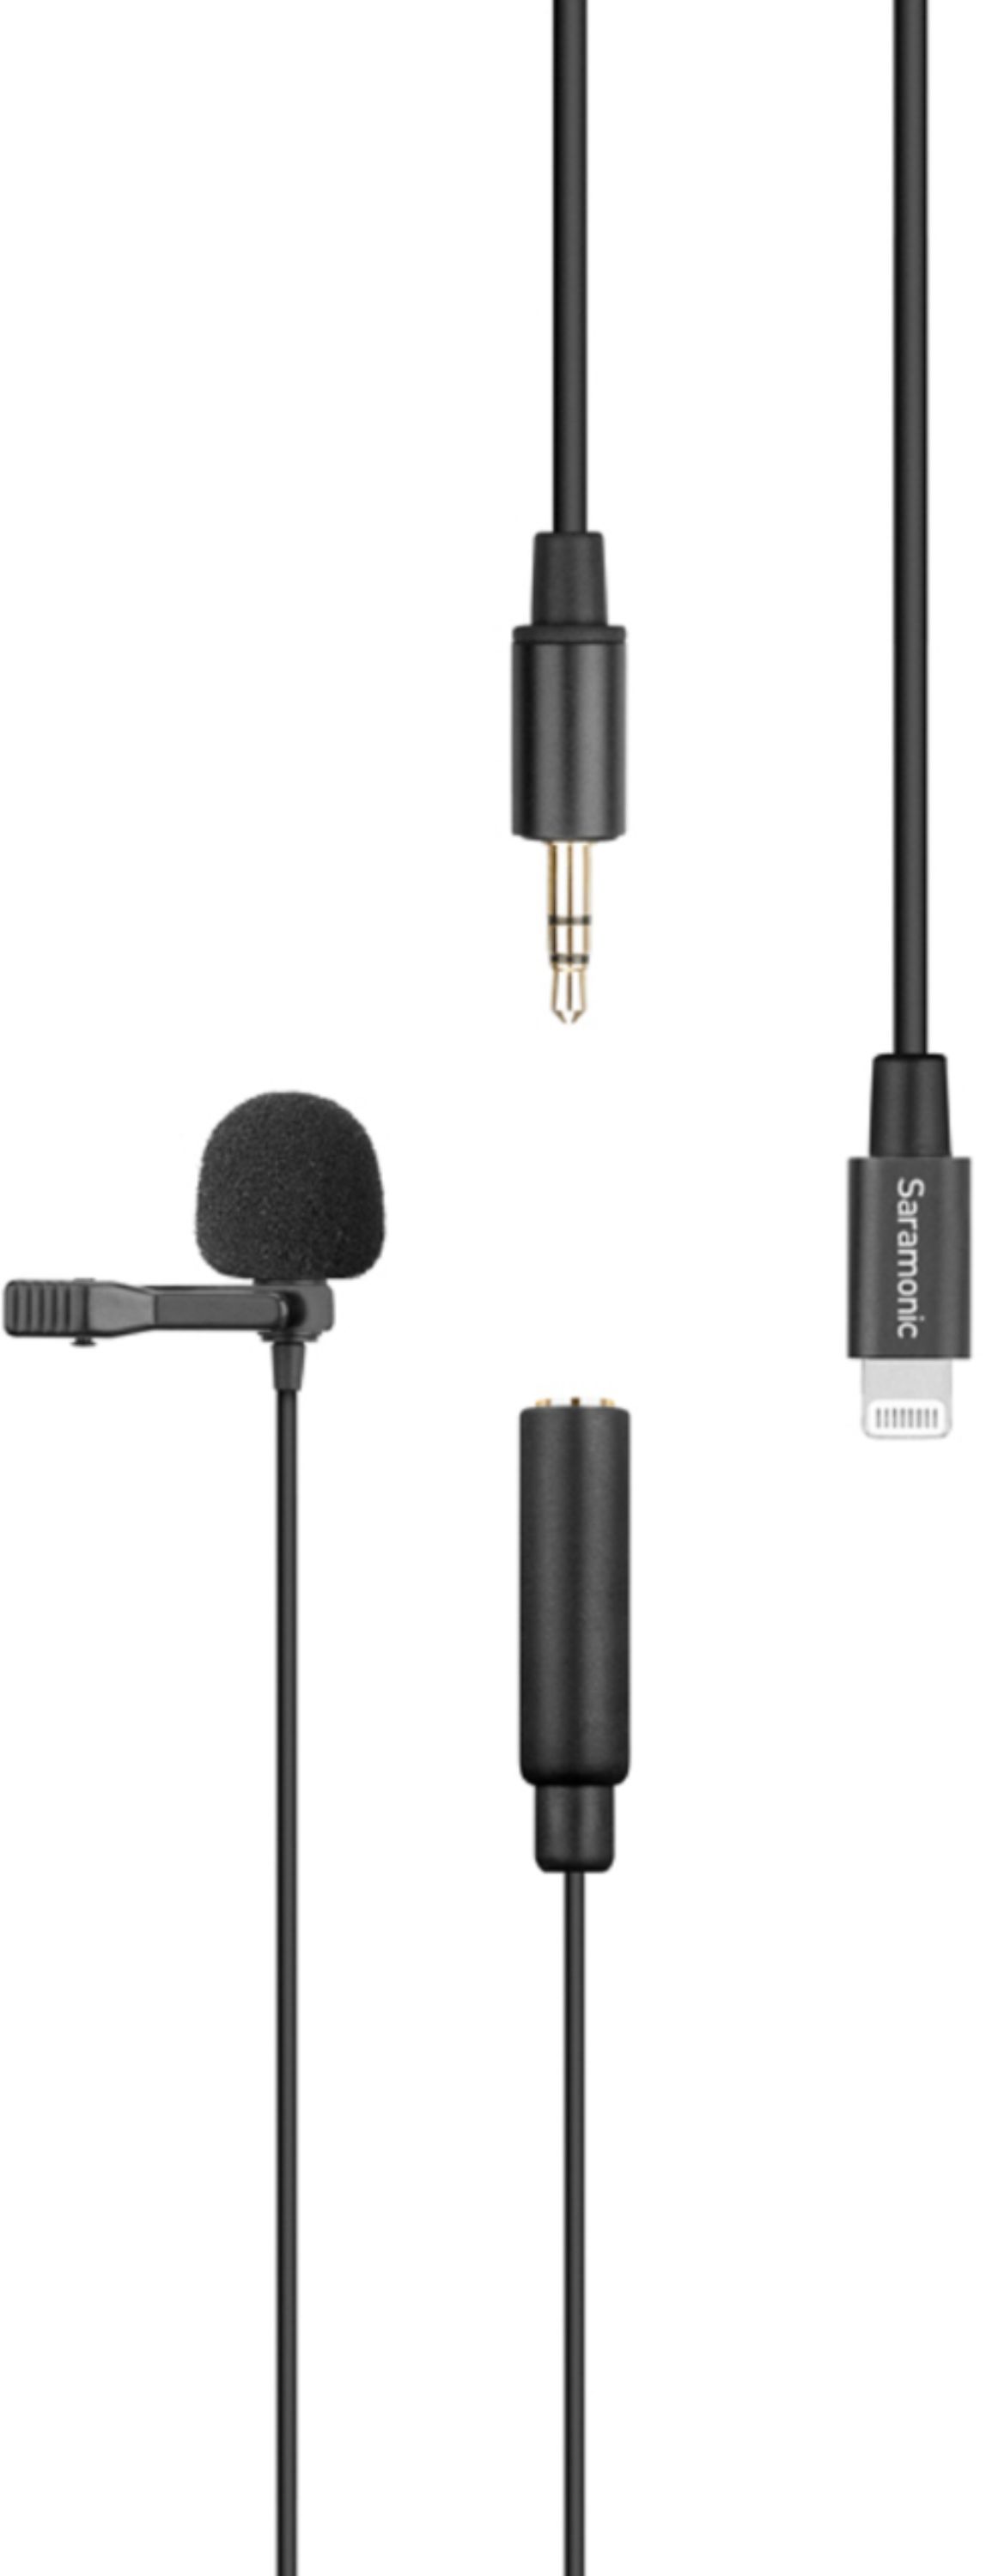 Saramonic Lavalier Microphone with Lightning for Apple iPhone, or iPad w/ a  Built-in 6.6-foot (2m) Cable (LavMicro U1A) LAVMICROU1A Best Buy